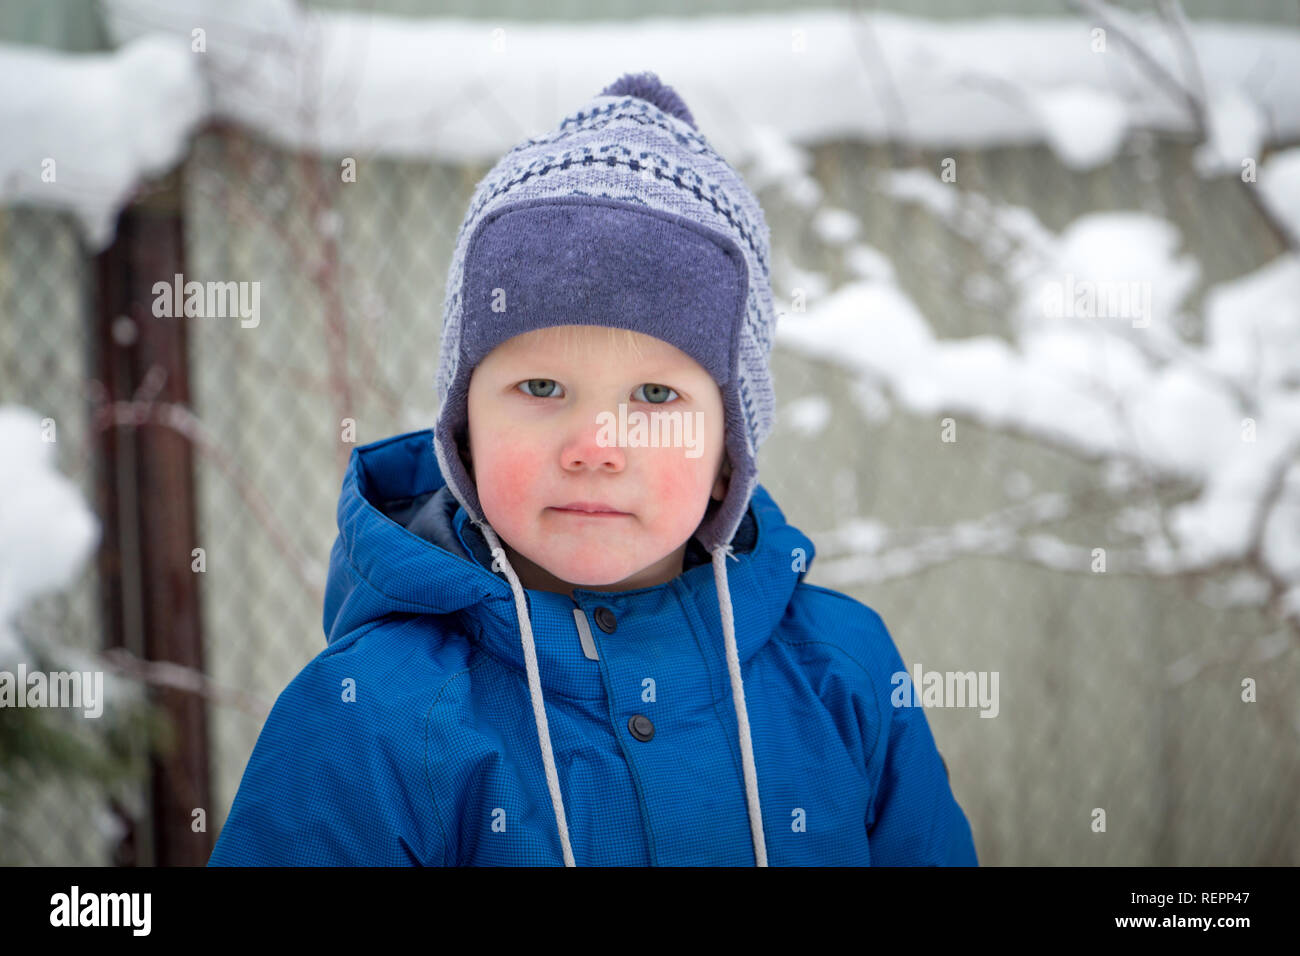 Portrait of a little boy in a winter hat and jacket while walking on a cold winter snowy day Stock Photo